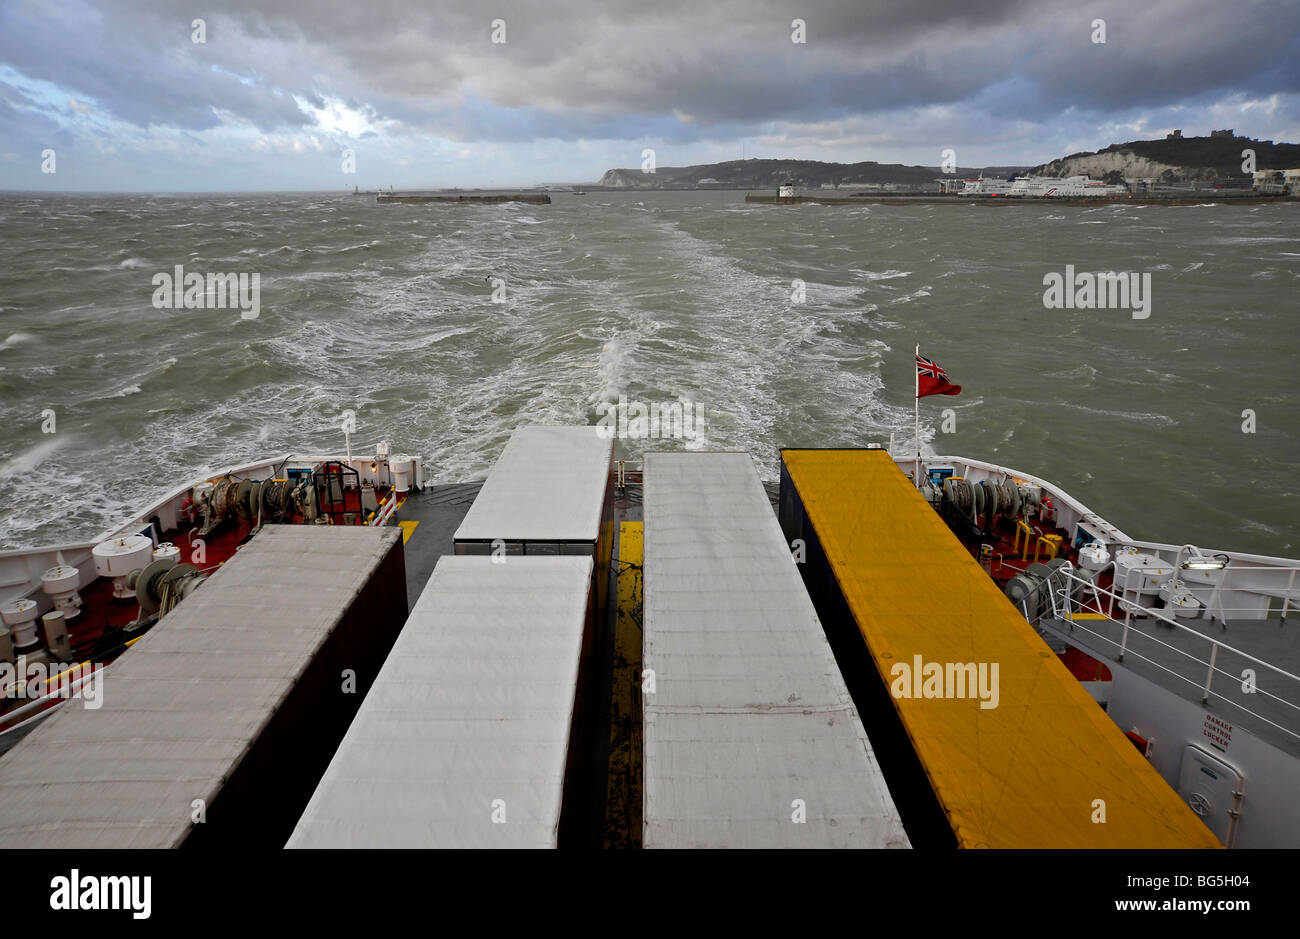 Cross channel ferry leaving dover port in stormy seas. Stock Photo